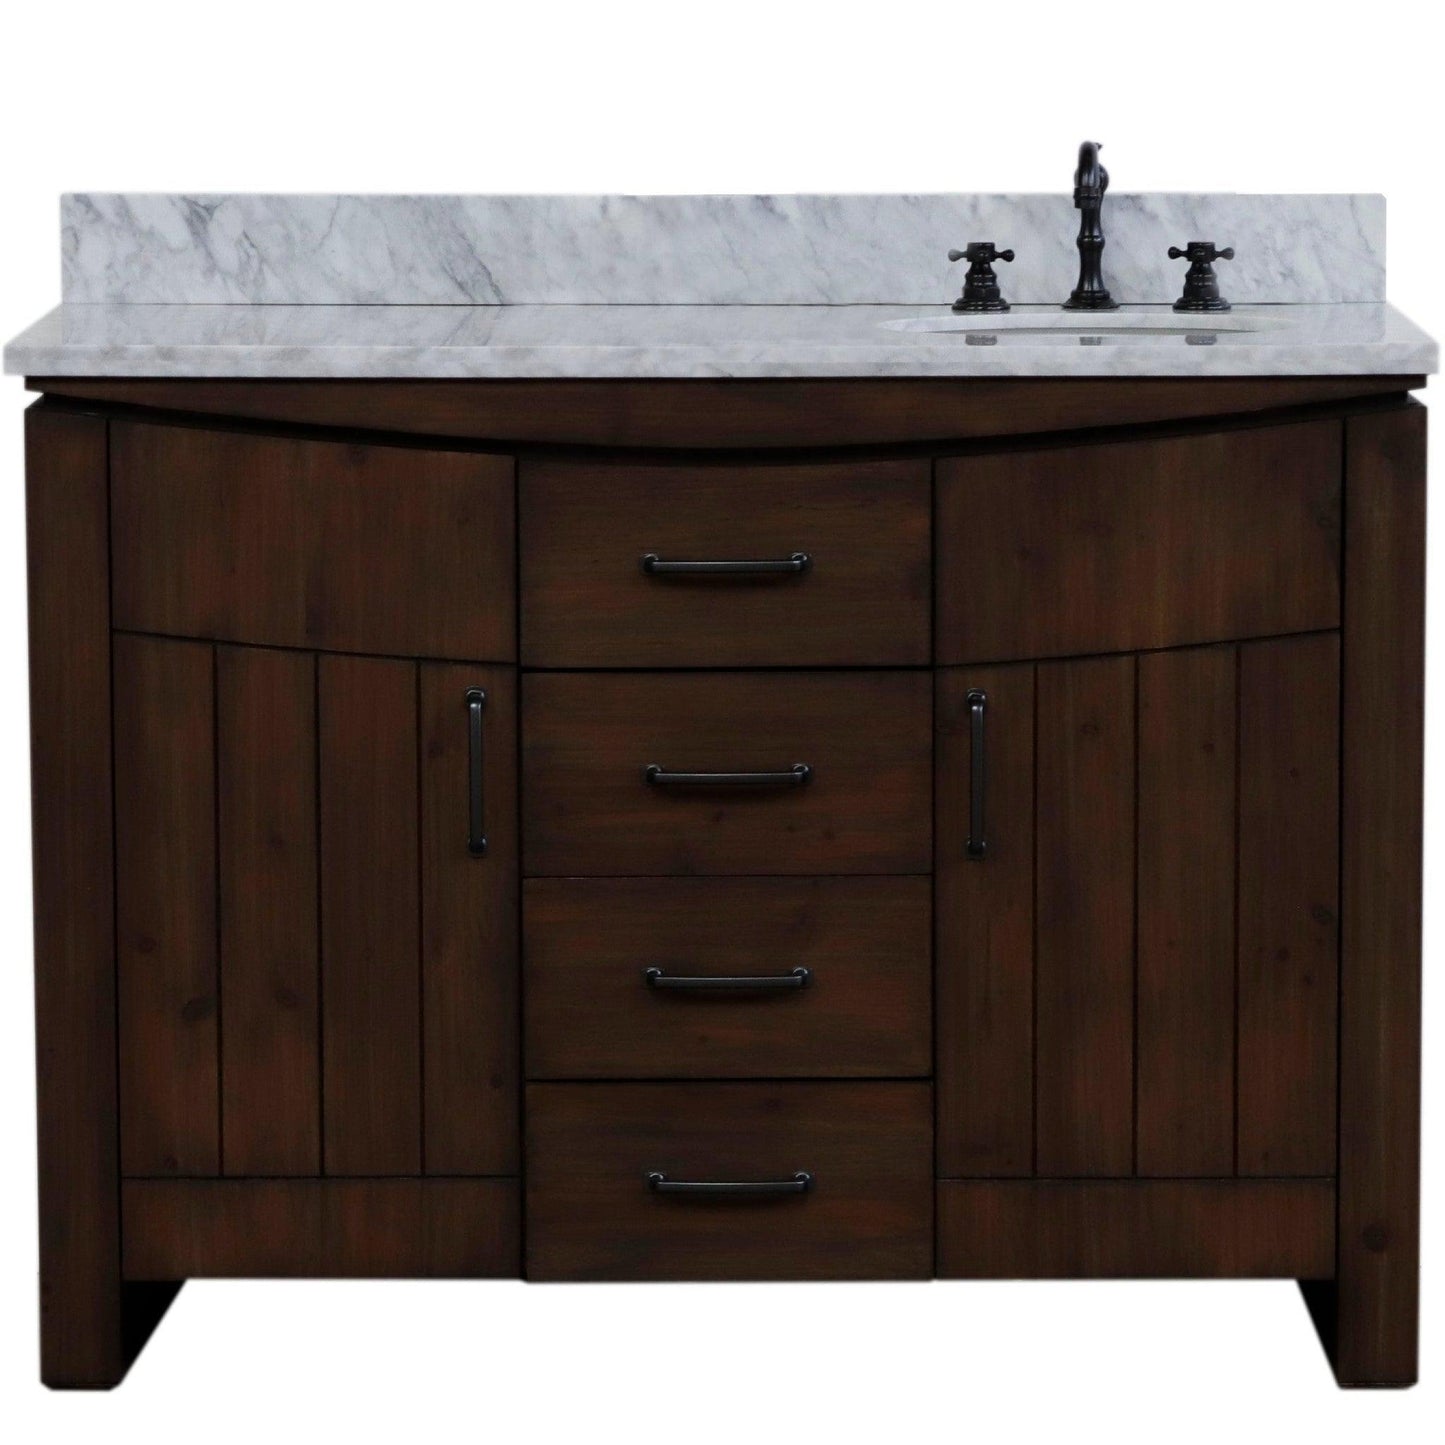 Bellaterra Home 48" 2-Door 3-Drawer Rustic Wood Freestanding Vanity Set With Ceramic Right Offset Undermount Oval Sink and White Marble Top